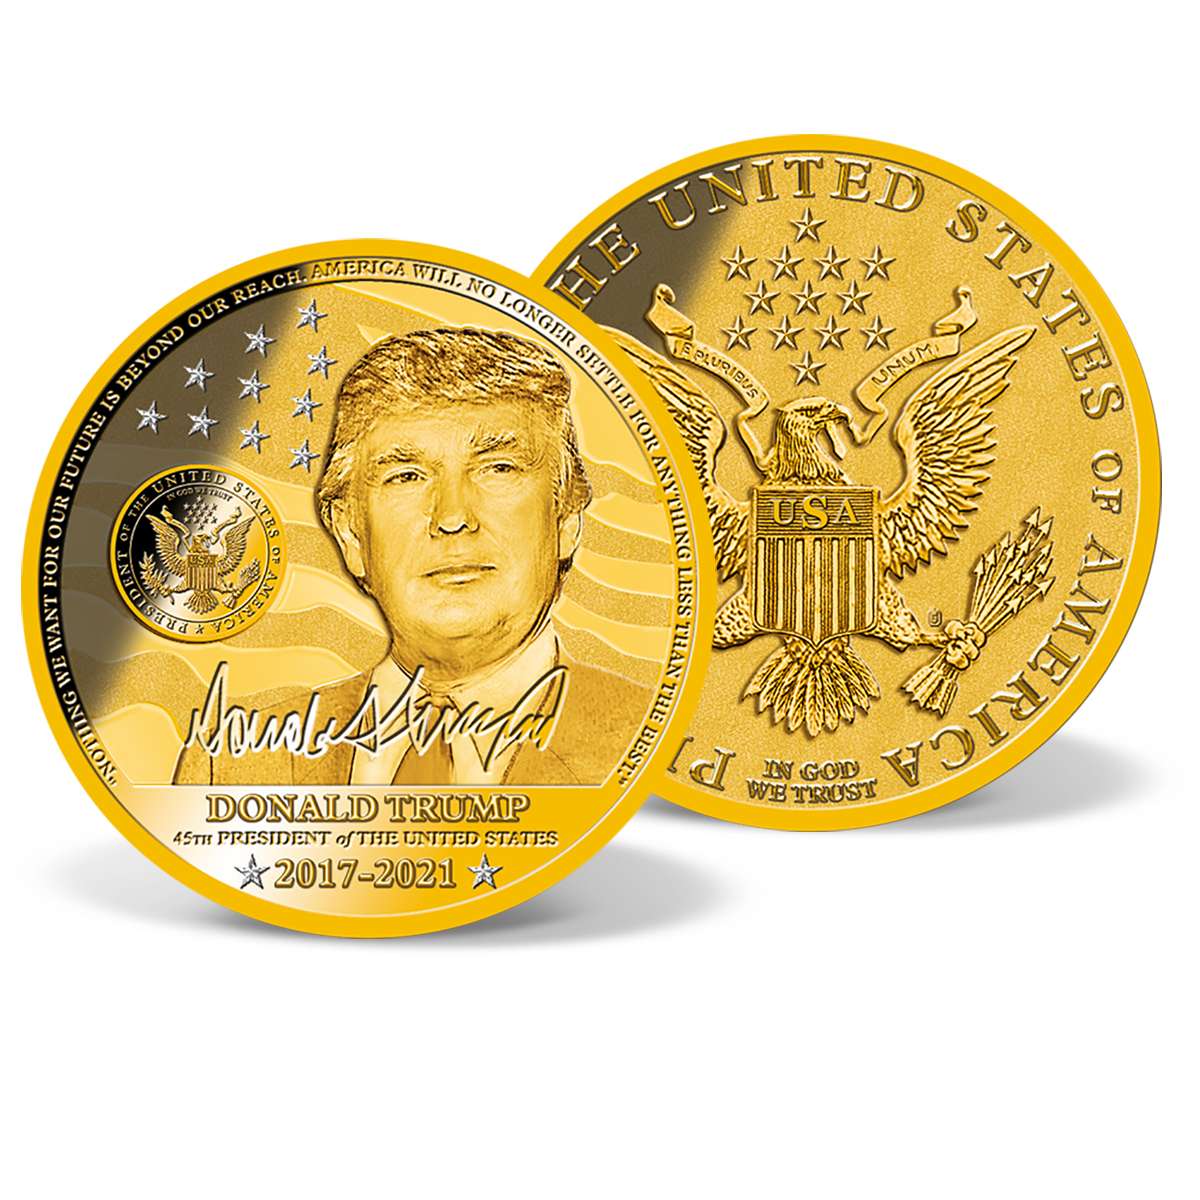 President Donald Trump Crystal-Inlaid Commemorative Coin | Gold-Layered ...